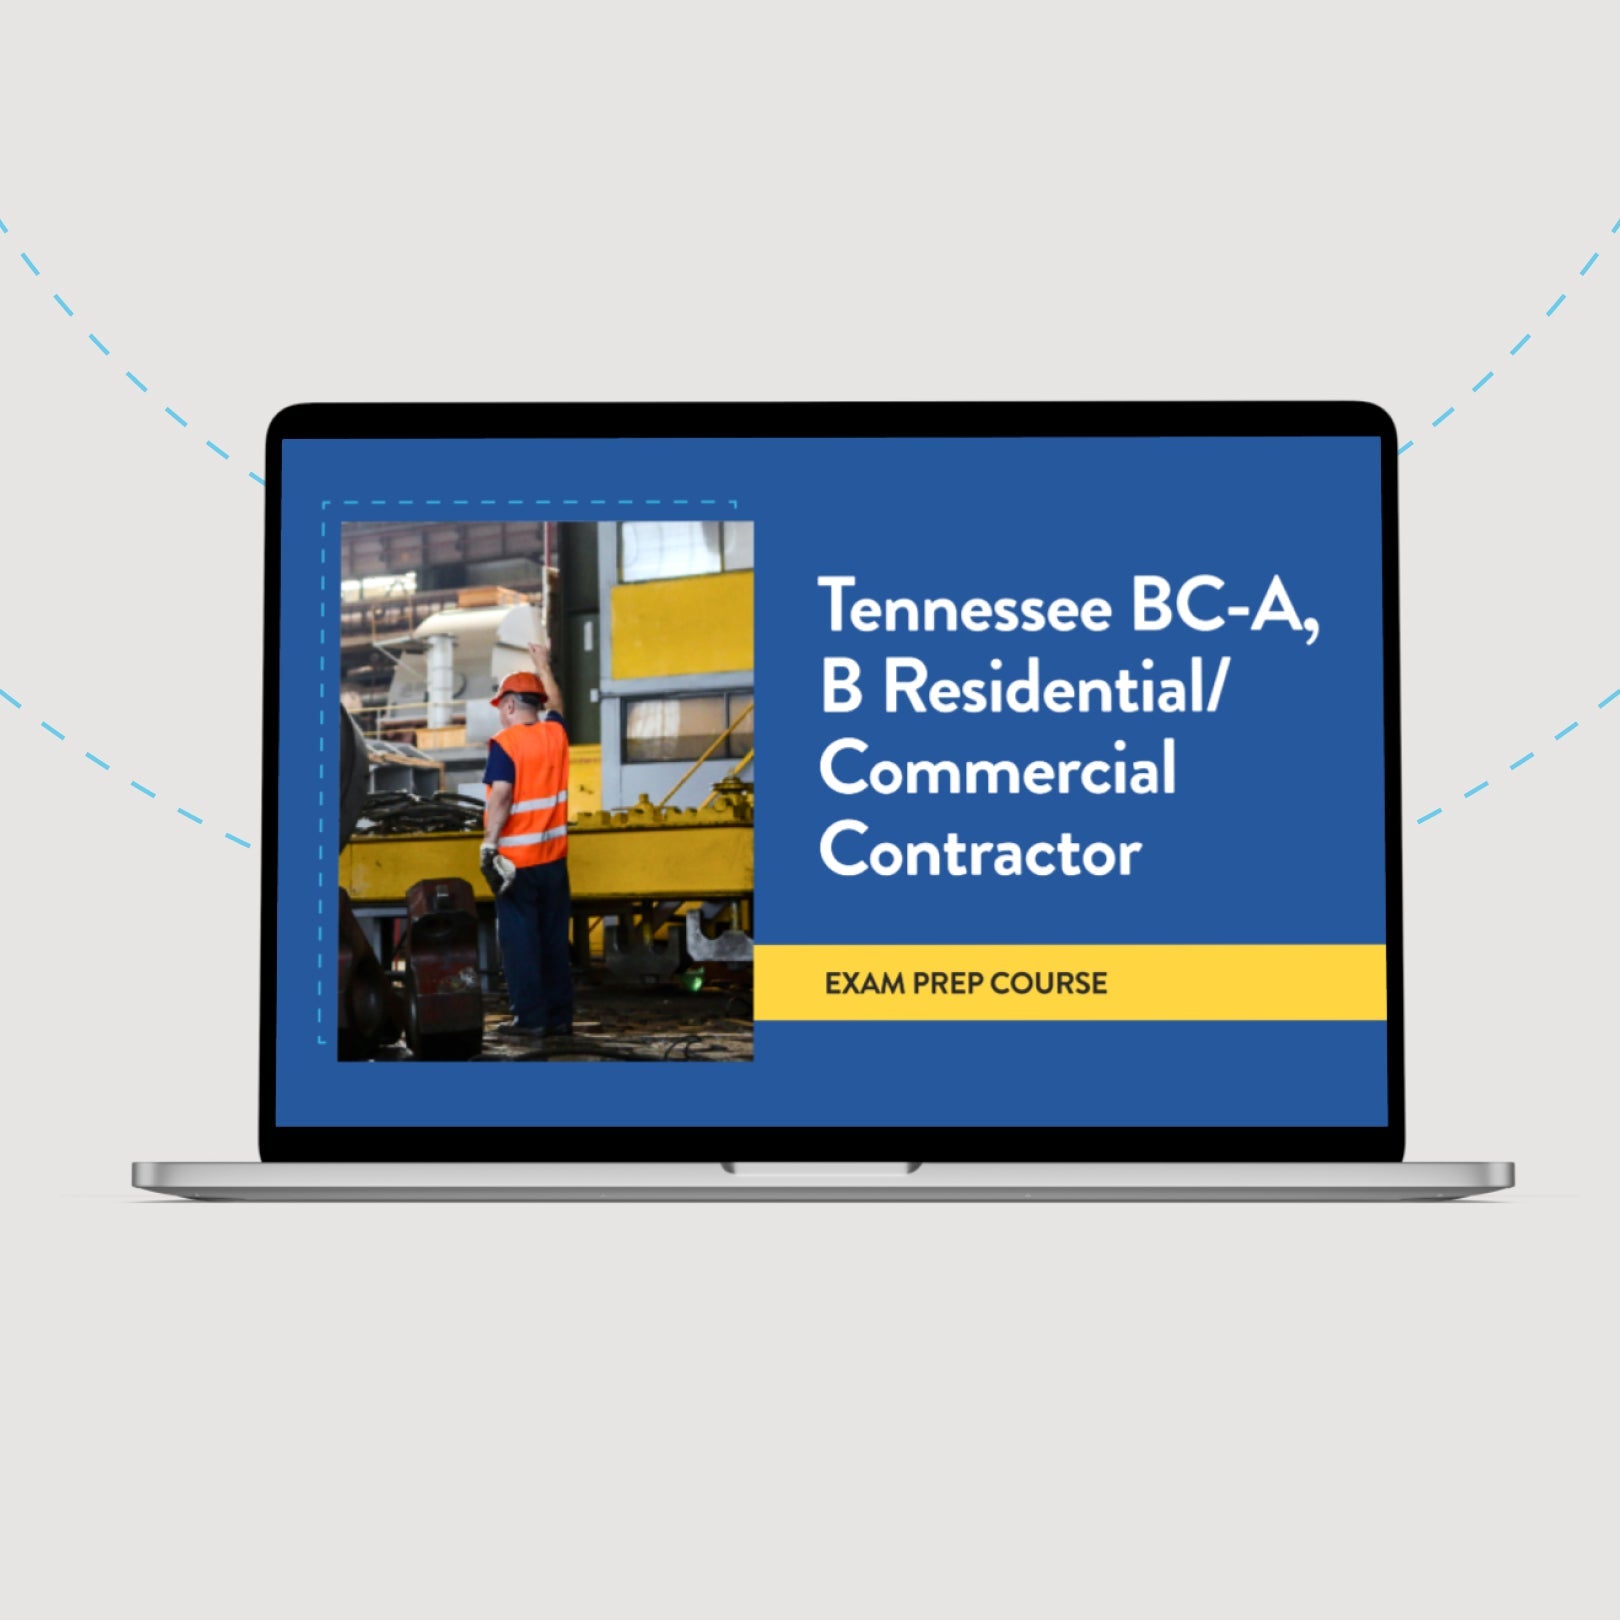 Tennessee BC-A, B Residential/Commercial Contractor Exam Prep Course